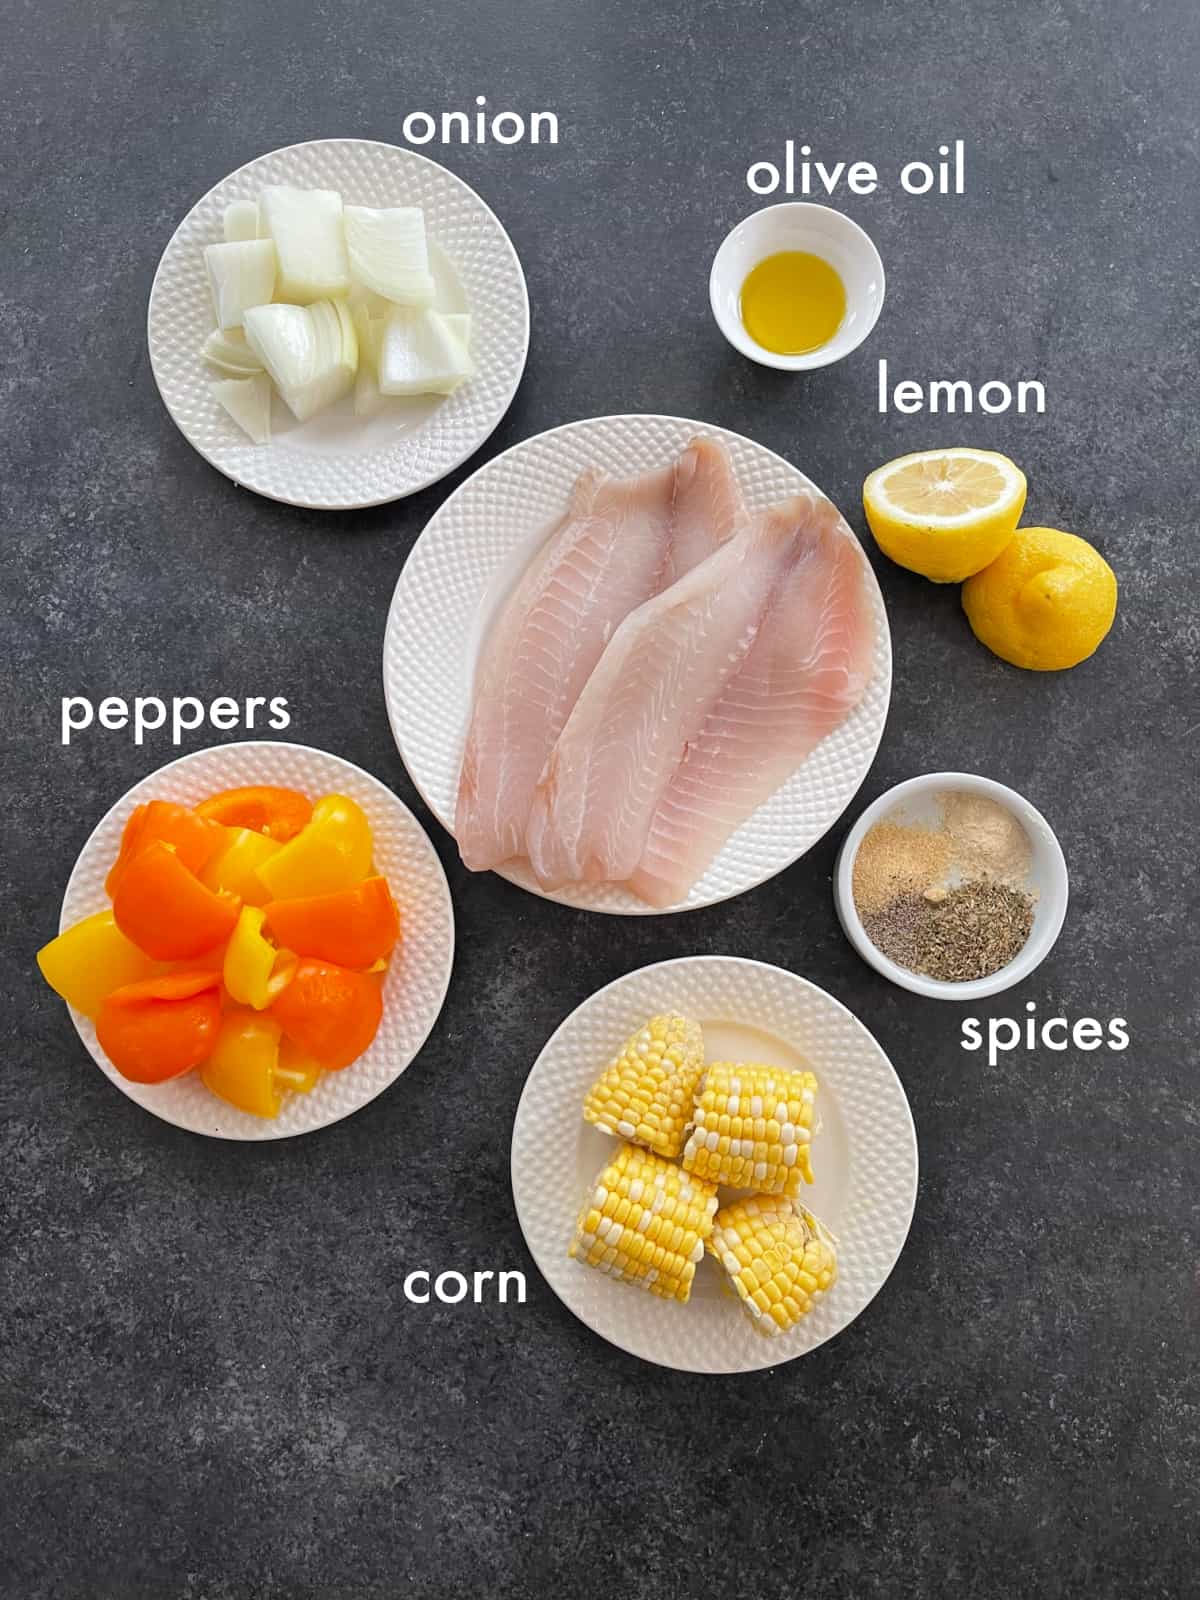 To make this recipe you need tilapia, peppers, onions, lemon, corn and spices. 